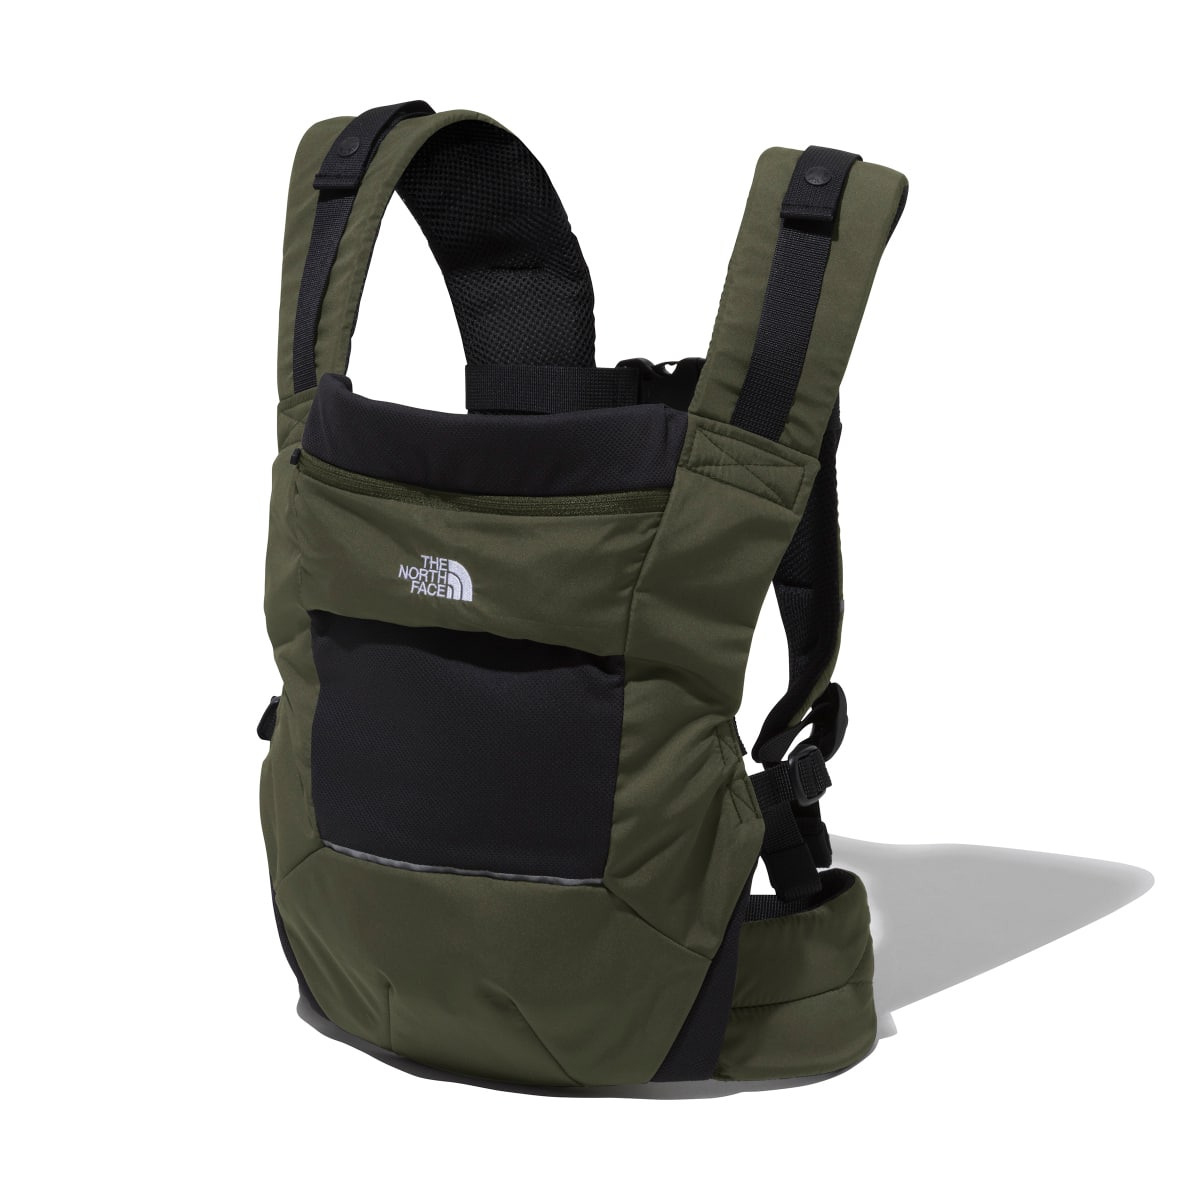 THE NORTH FACE BABY COMPACT CARRIER ニュートープ 23SS-I_photo_large